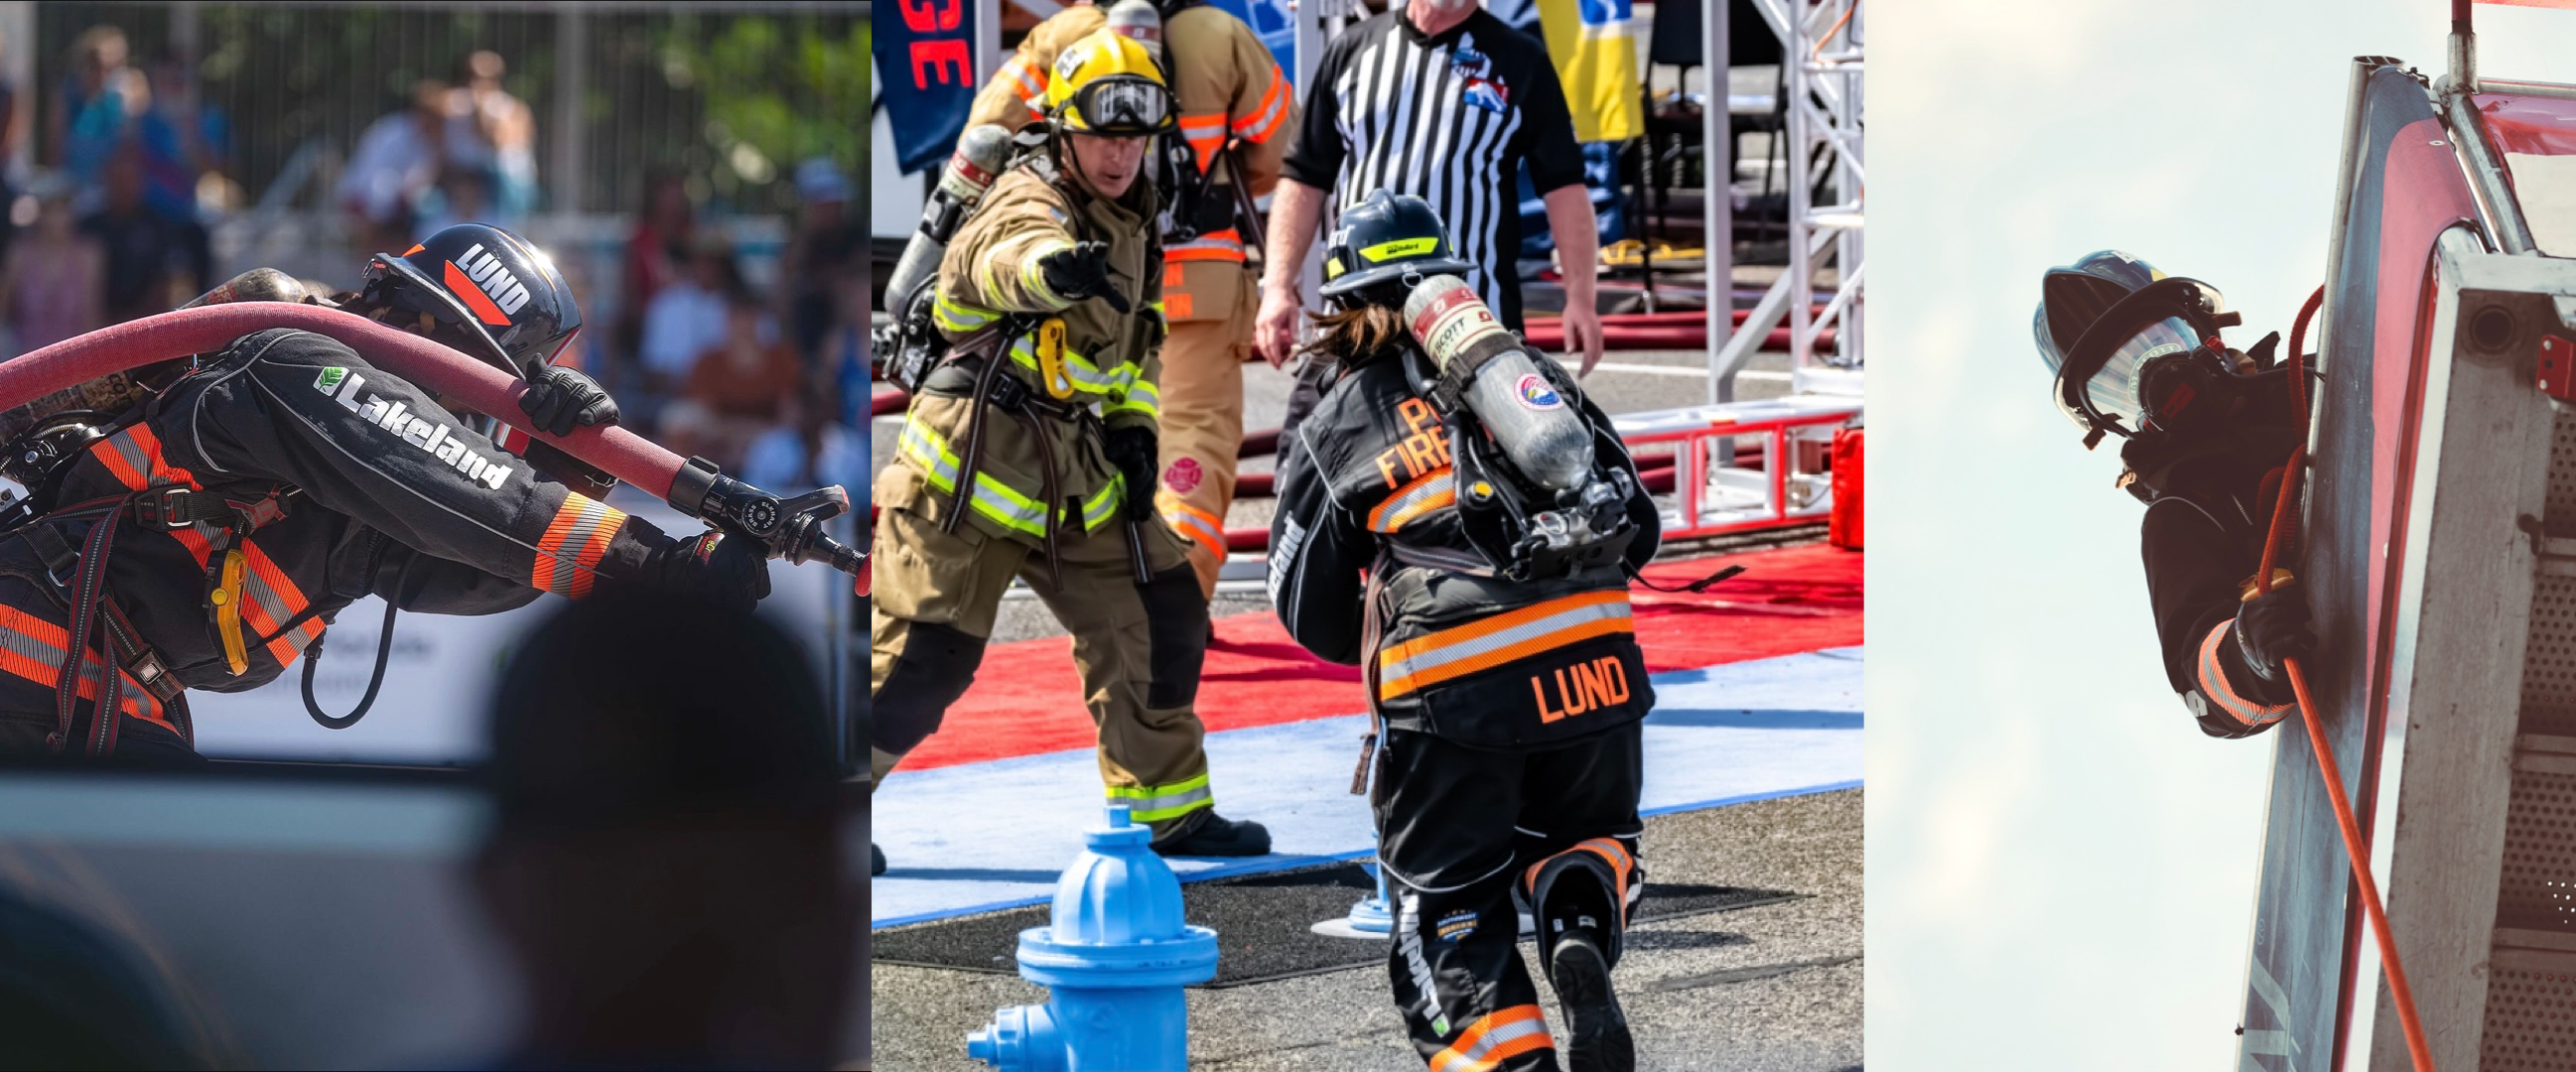 “It’s Amazing to be a Woman in the Fire Service”